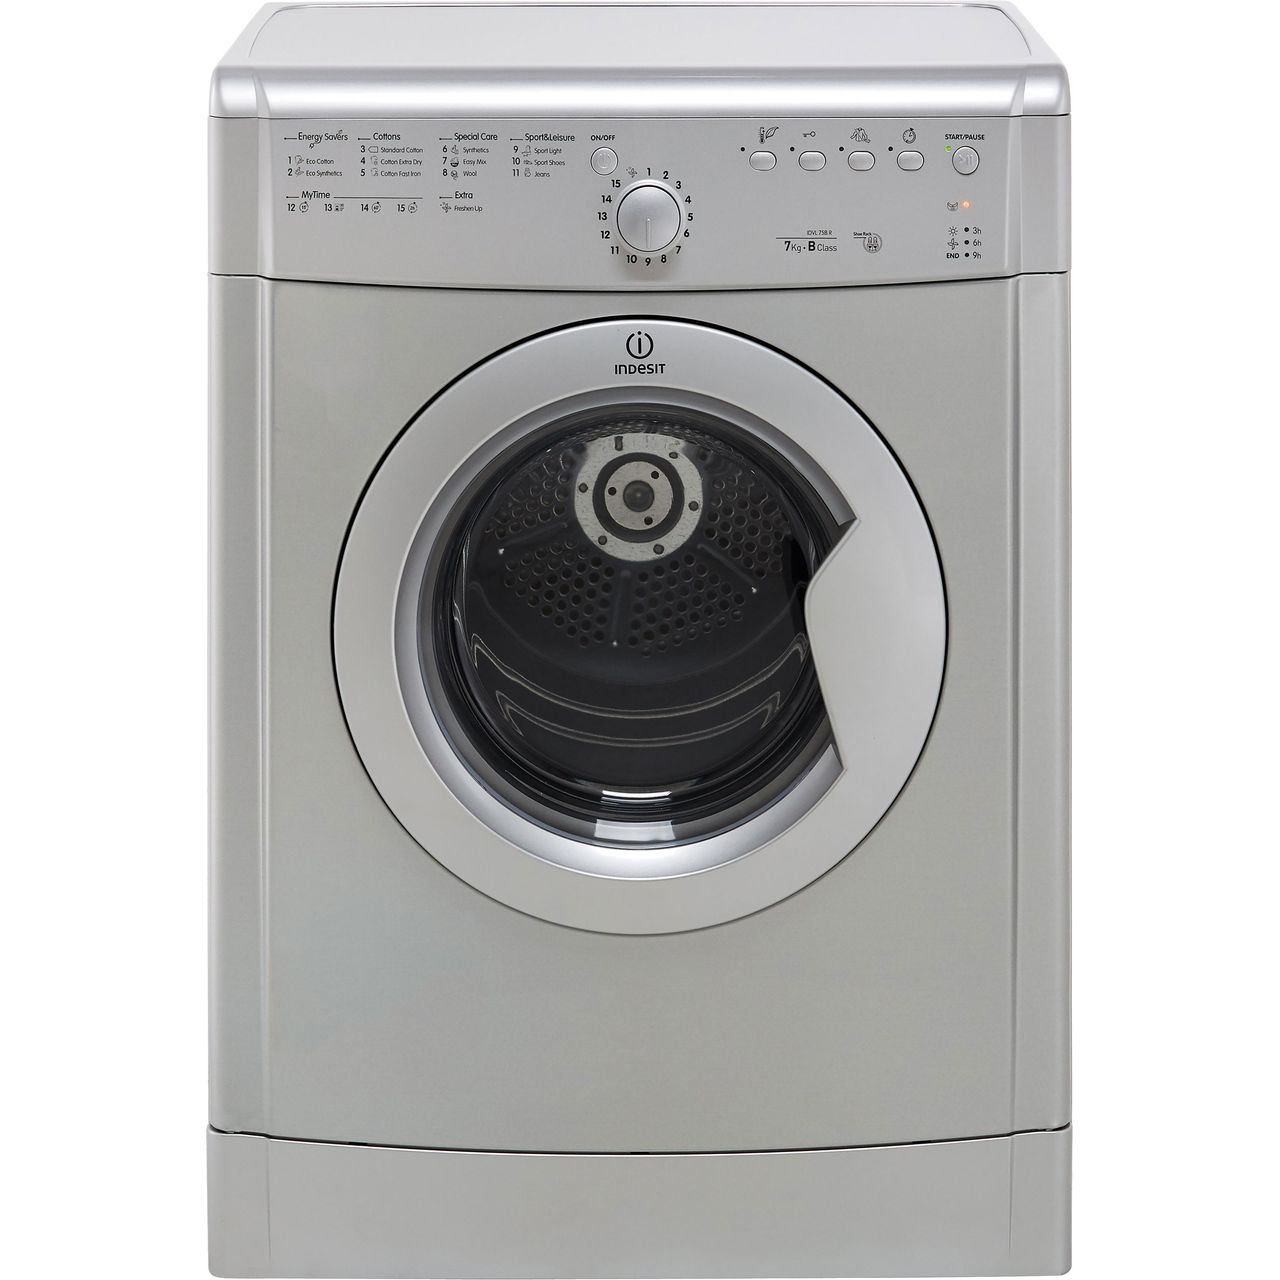 Indesit Eco Time IDVL75BRS 7Kg Vented Tumble Dryer Review